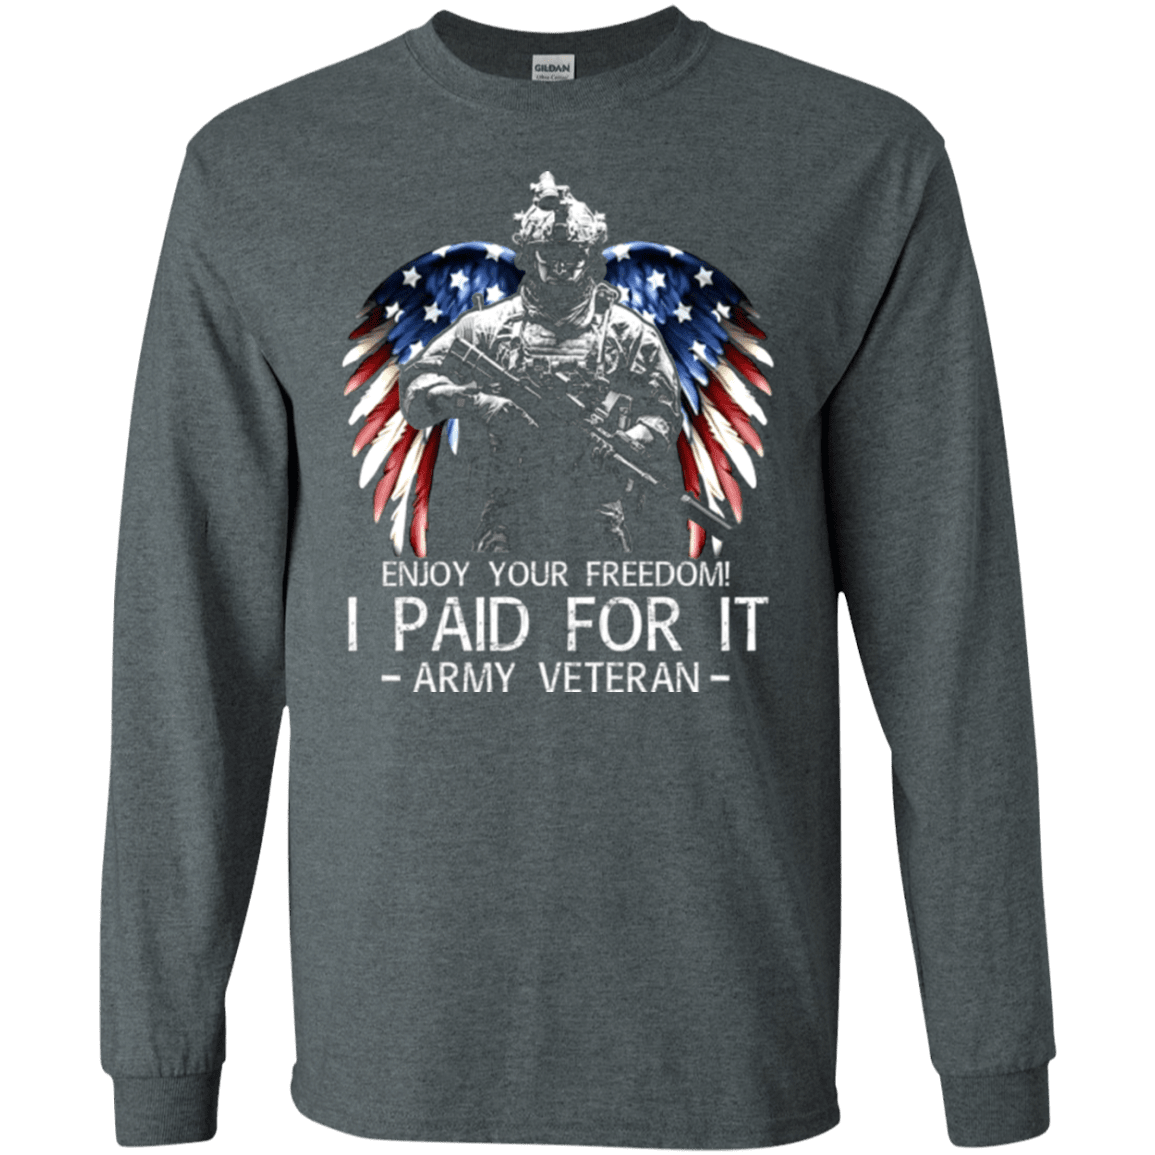 Army Veteran - Enjoy your freedom I paid for it Men Front T Shirts-TShirt-Army-Veterans Nation